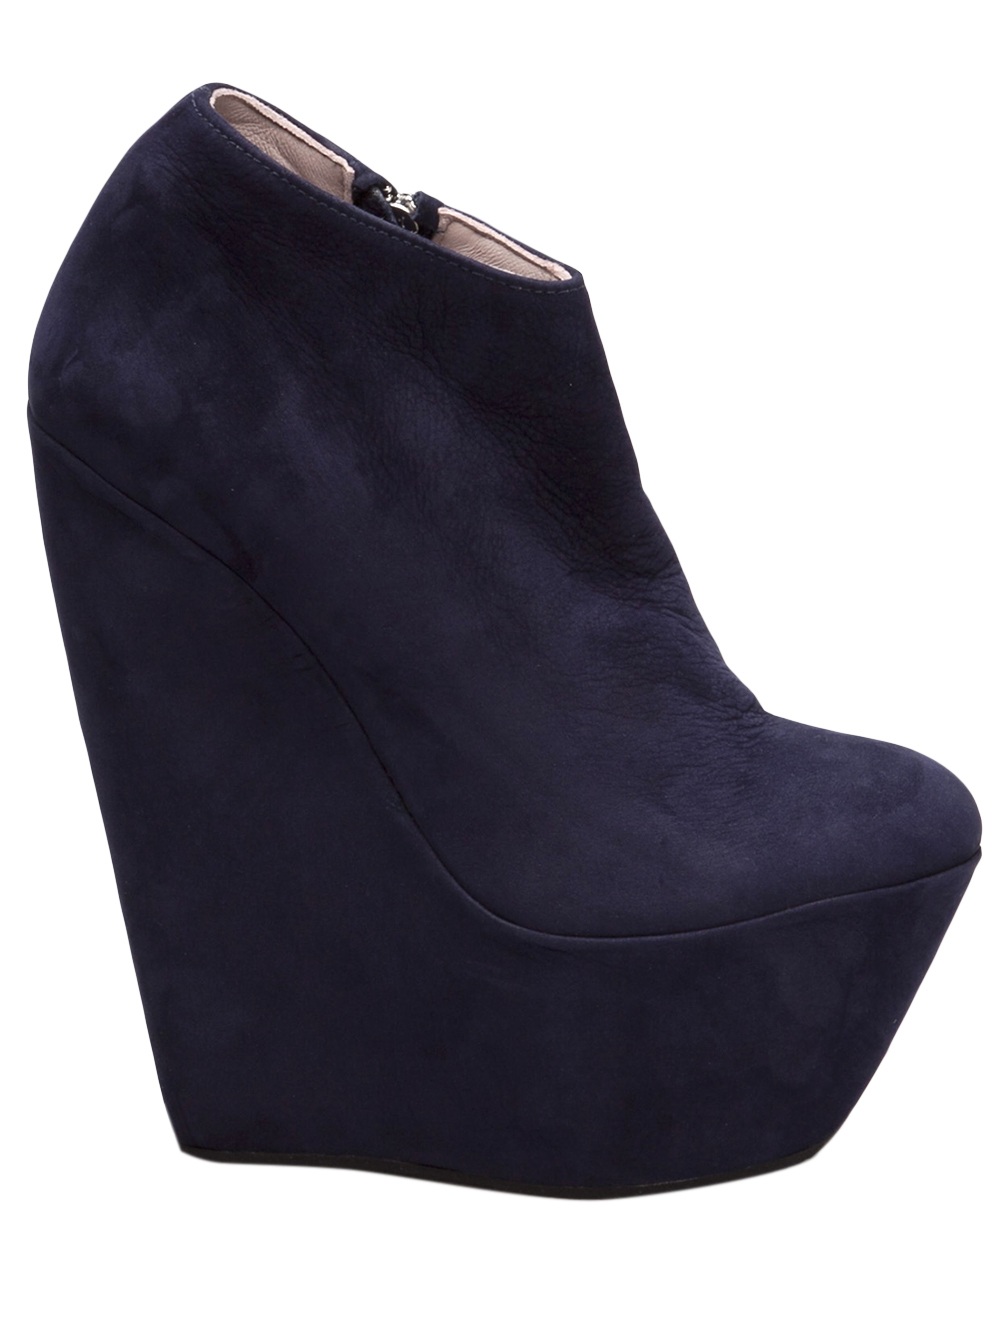 Lyst - Penelope and coco Platform Wedge Bootie in Blue